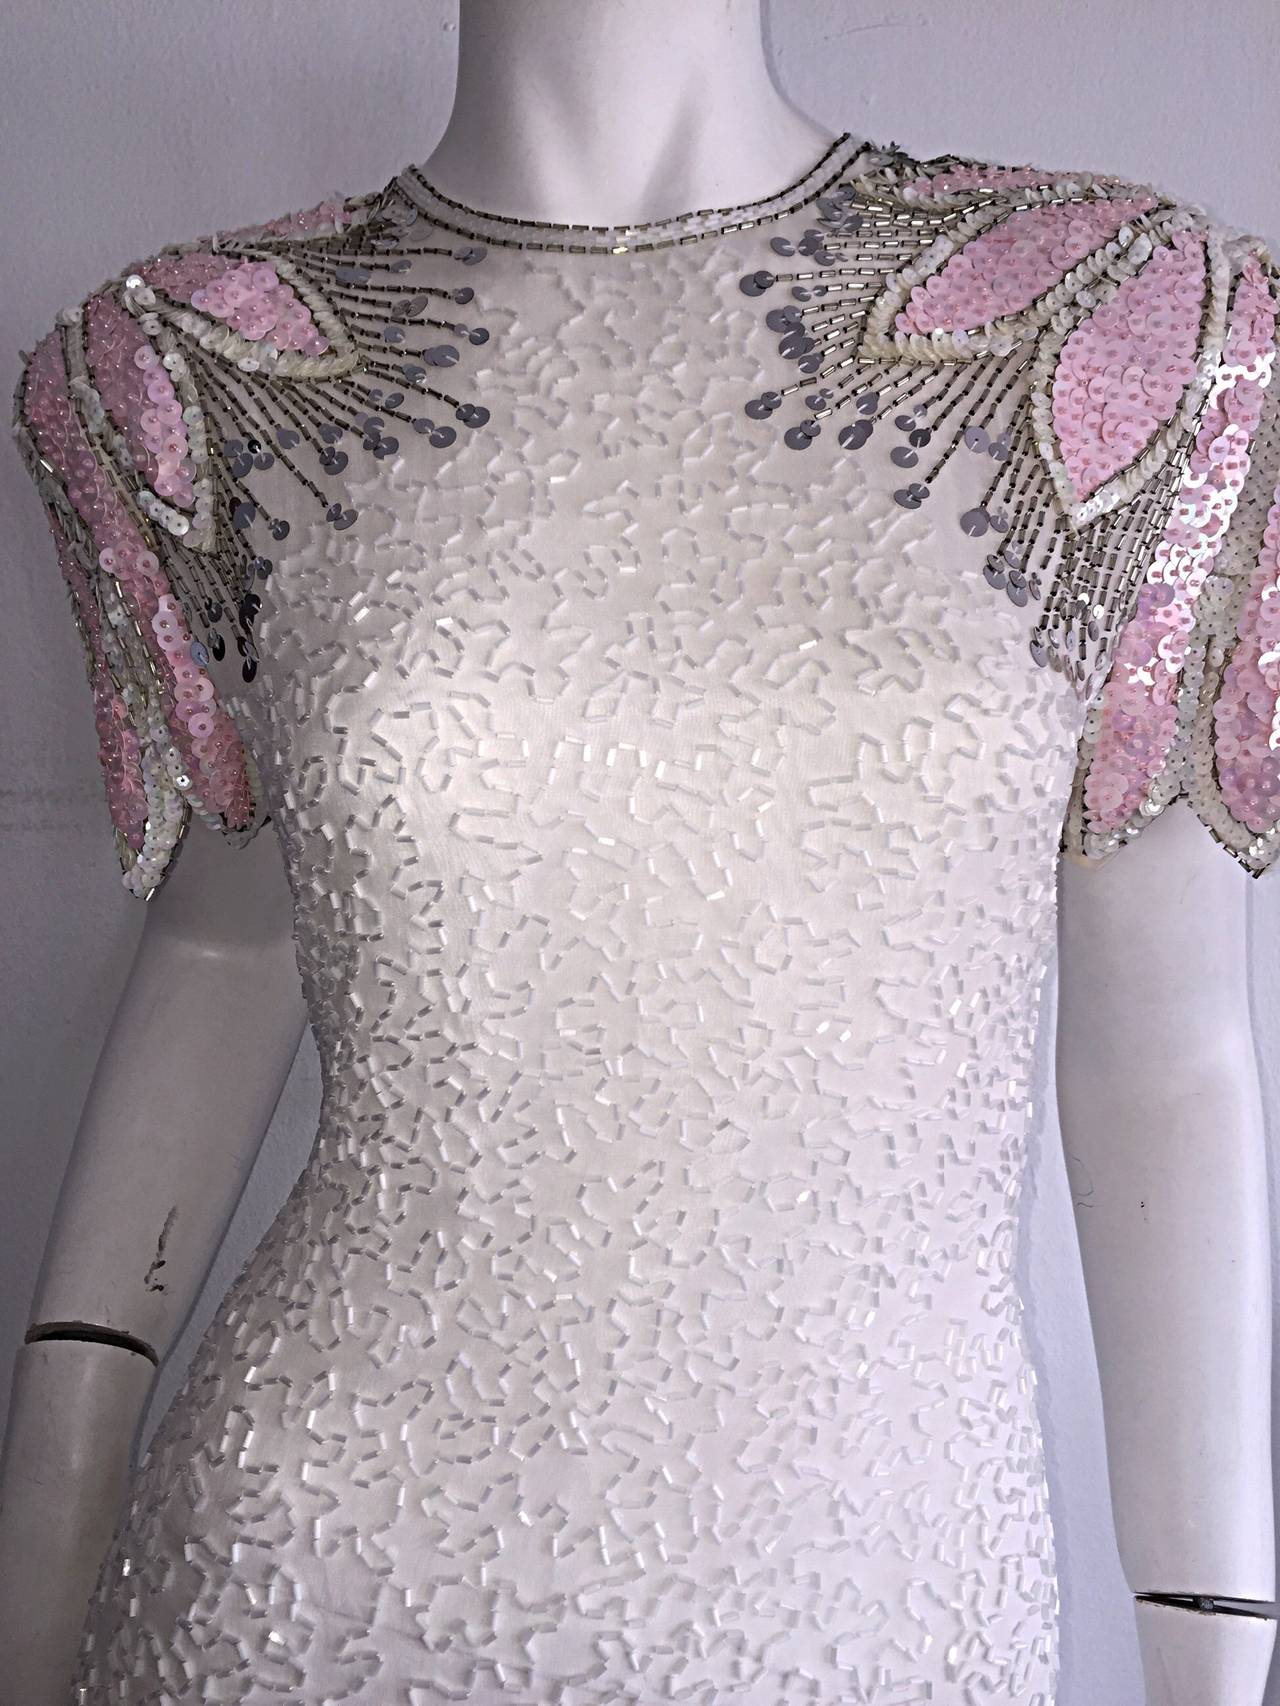 Women's Stunning Vintage White + Pink + Silver Beaded Sequin Illusion Dress w/ Open Back